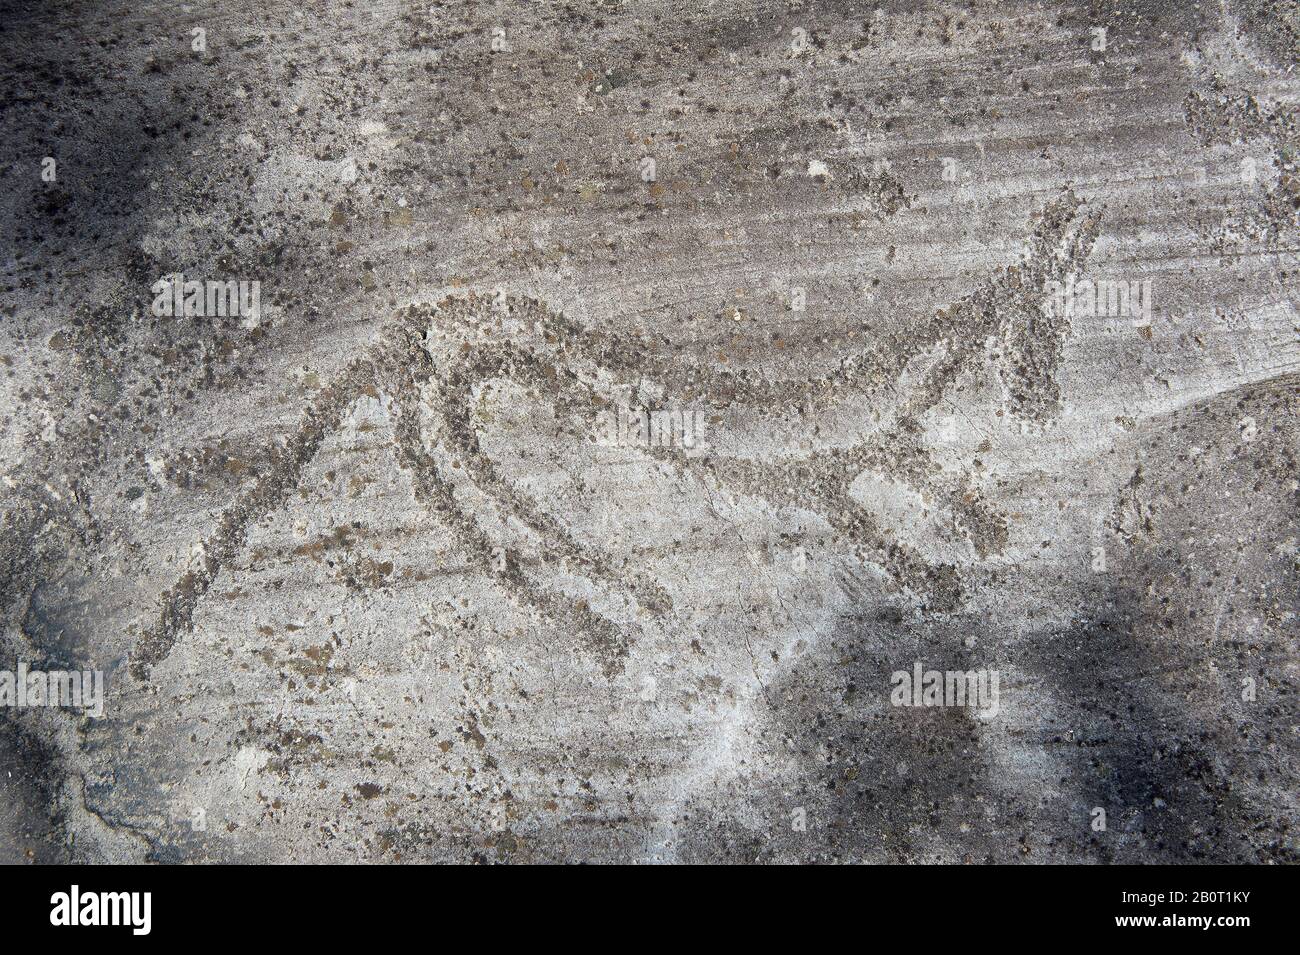 Petroglyph, rock carving, of a an animal carved by the ancient Camuni people in the iron age between  900-1200 BC. Rock 26-27, Foppi di Nadro, Riserva Stock Photo